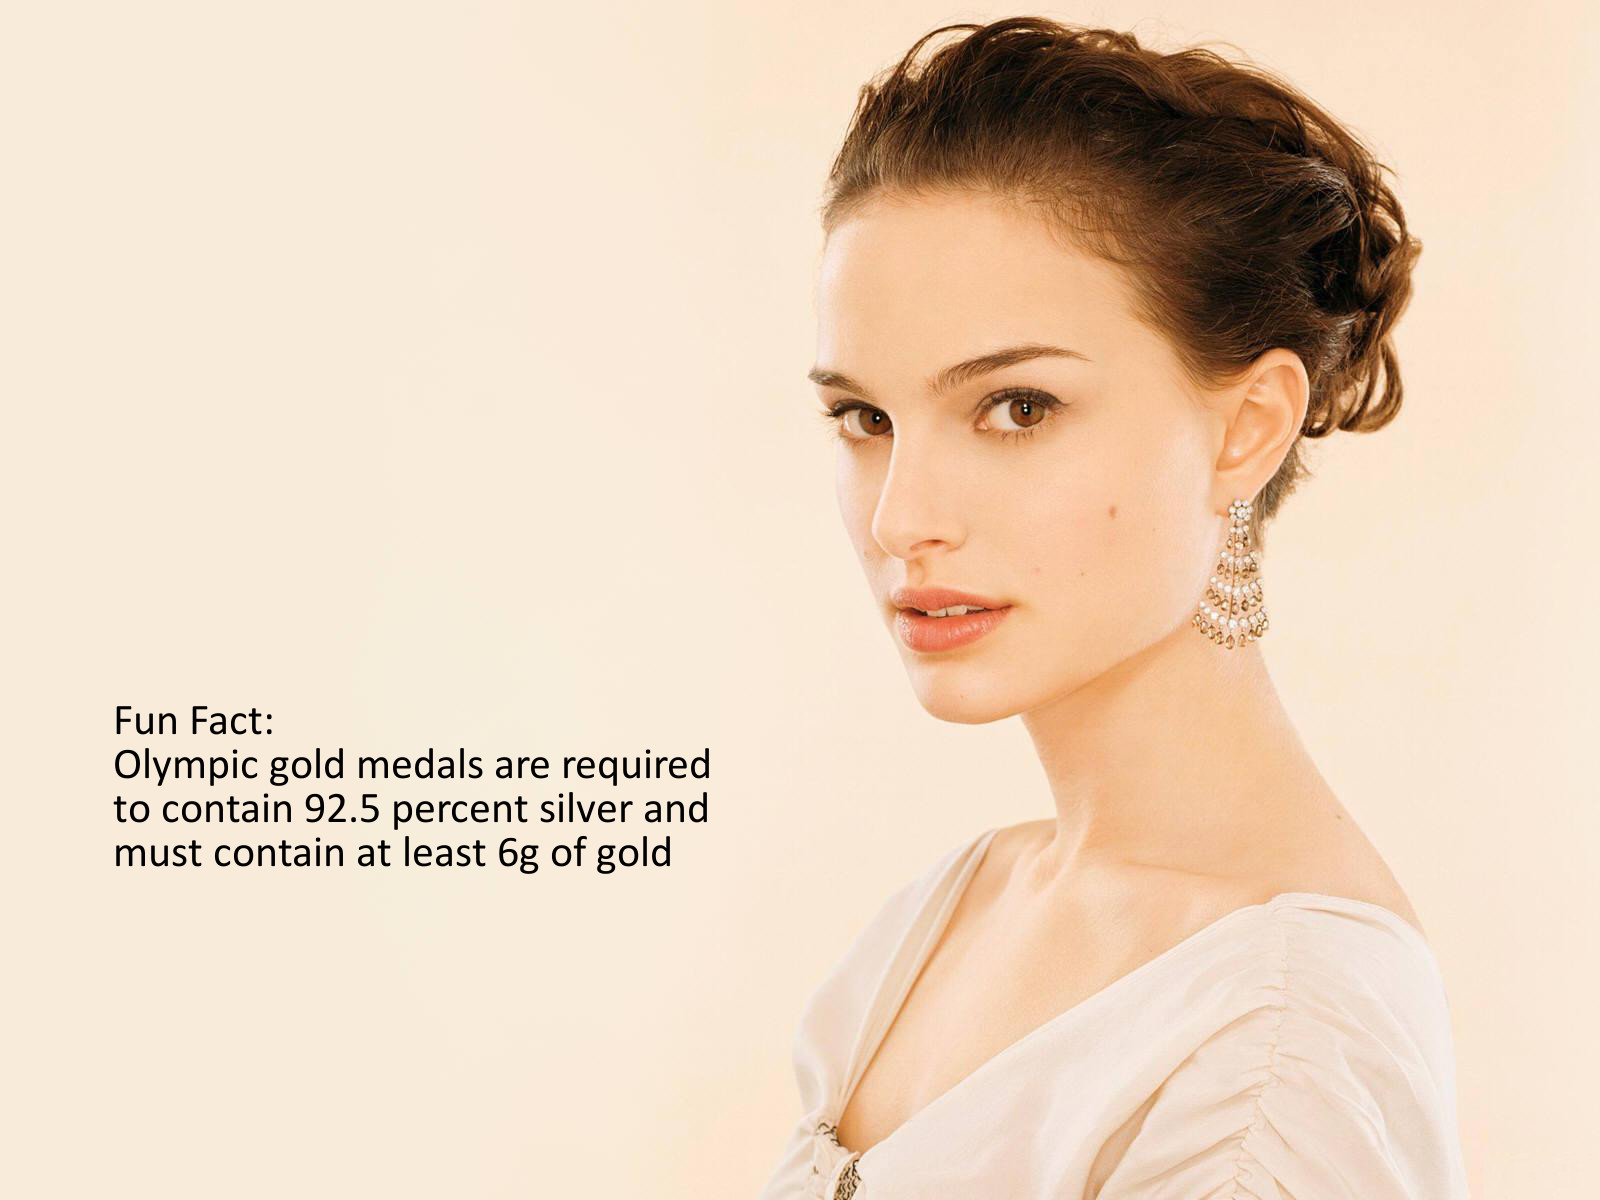 natalie portman - Fun Fact Olympic gold medals are required to contain 92.5 percent silver and must contain at least 6g of gold